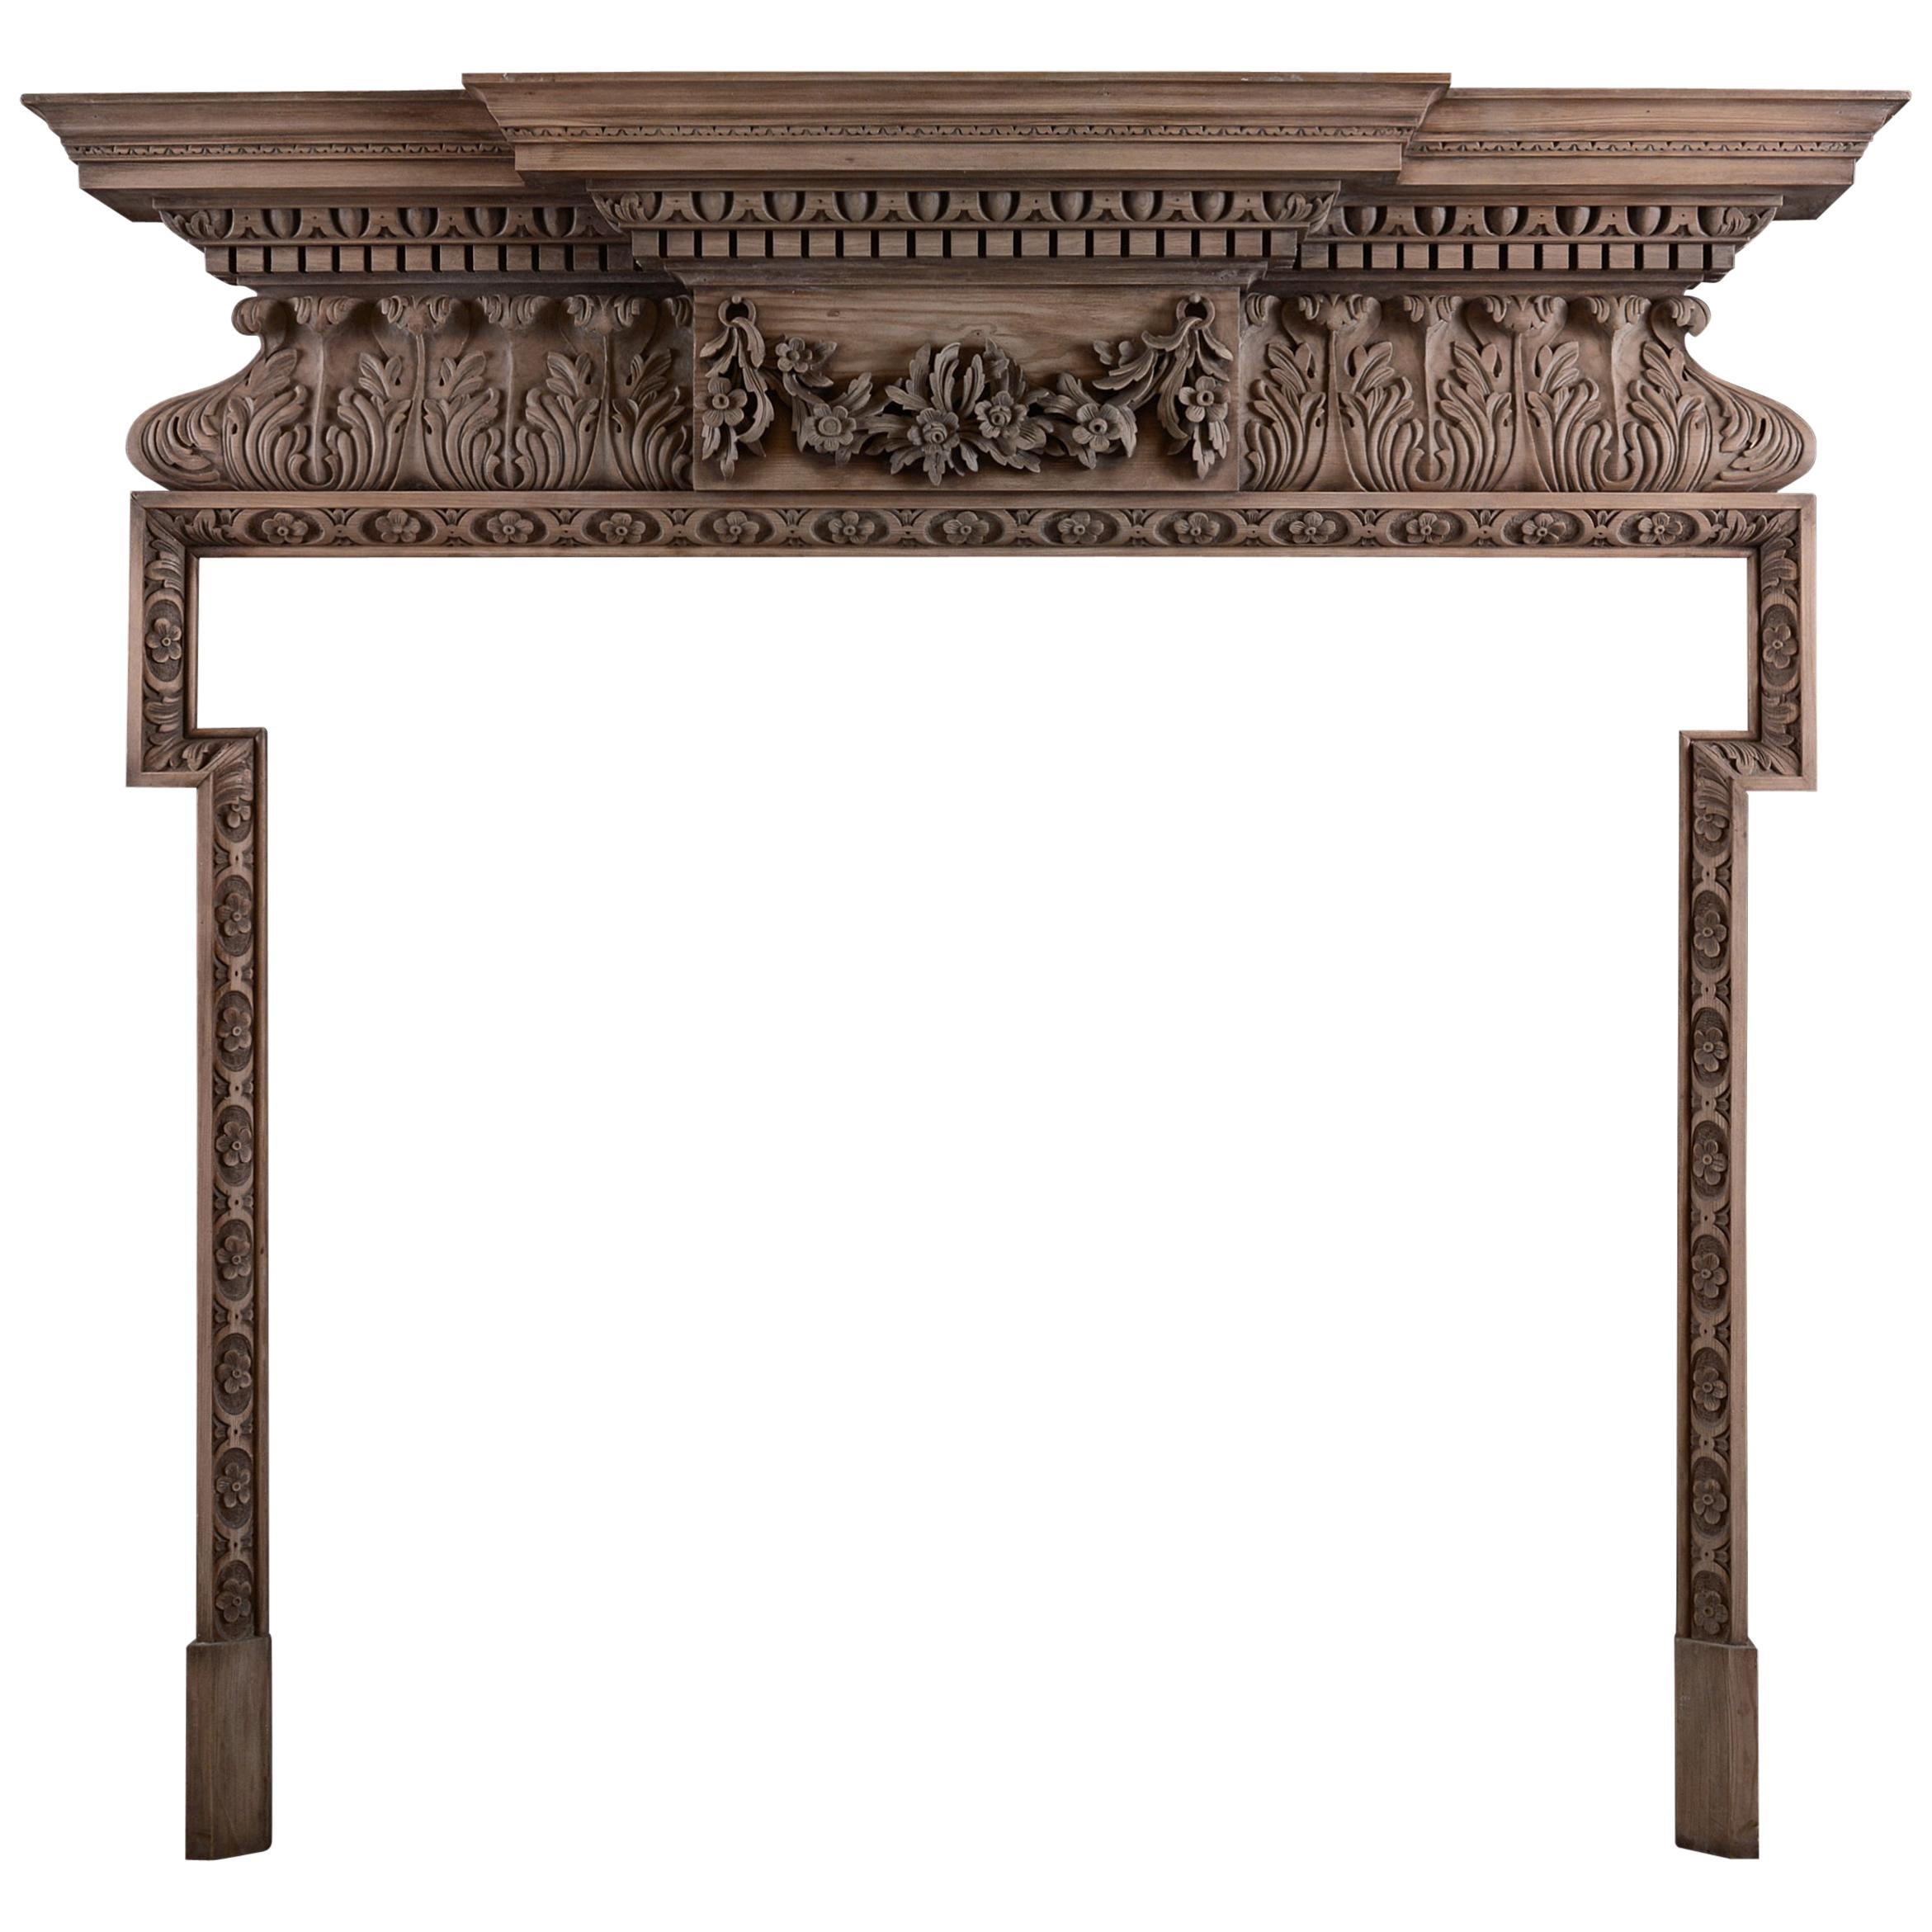 English Carved Pine Fireplace For Sale